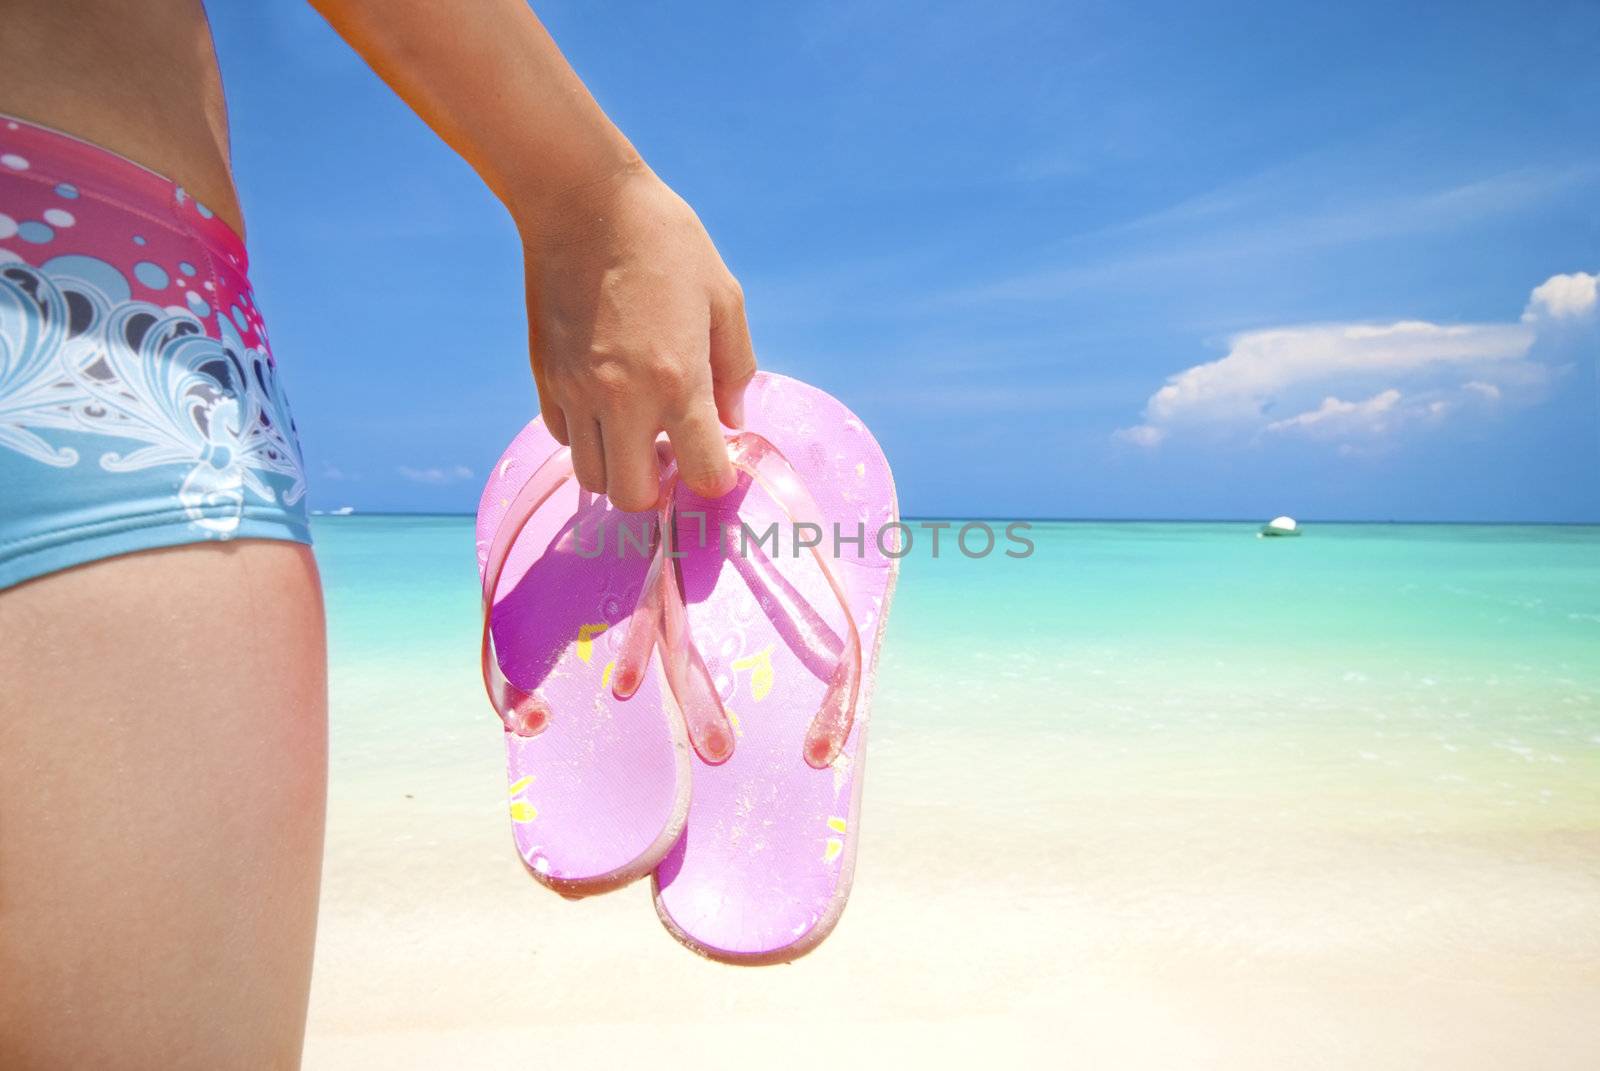 asian girl on a beach holding slipper by yuliang11